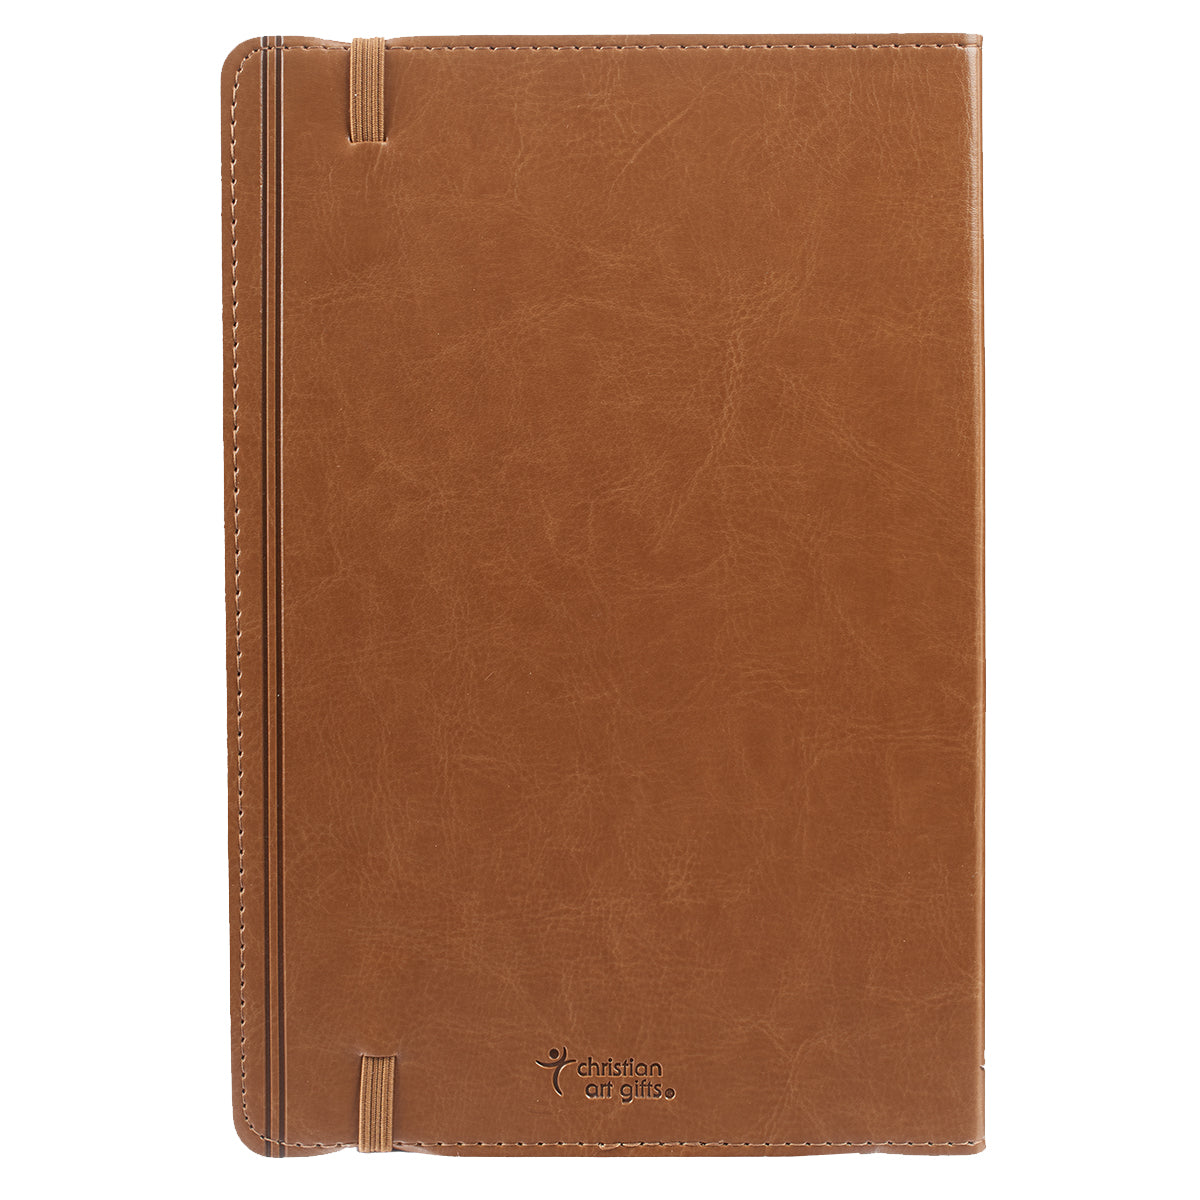 Image of Be Still & Know Tan Flexcover Journal - Psalm 46:10 other